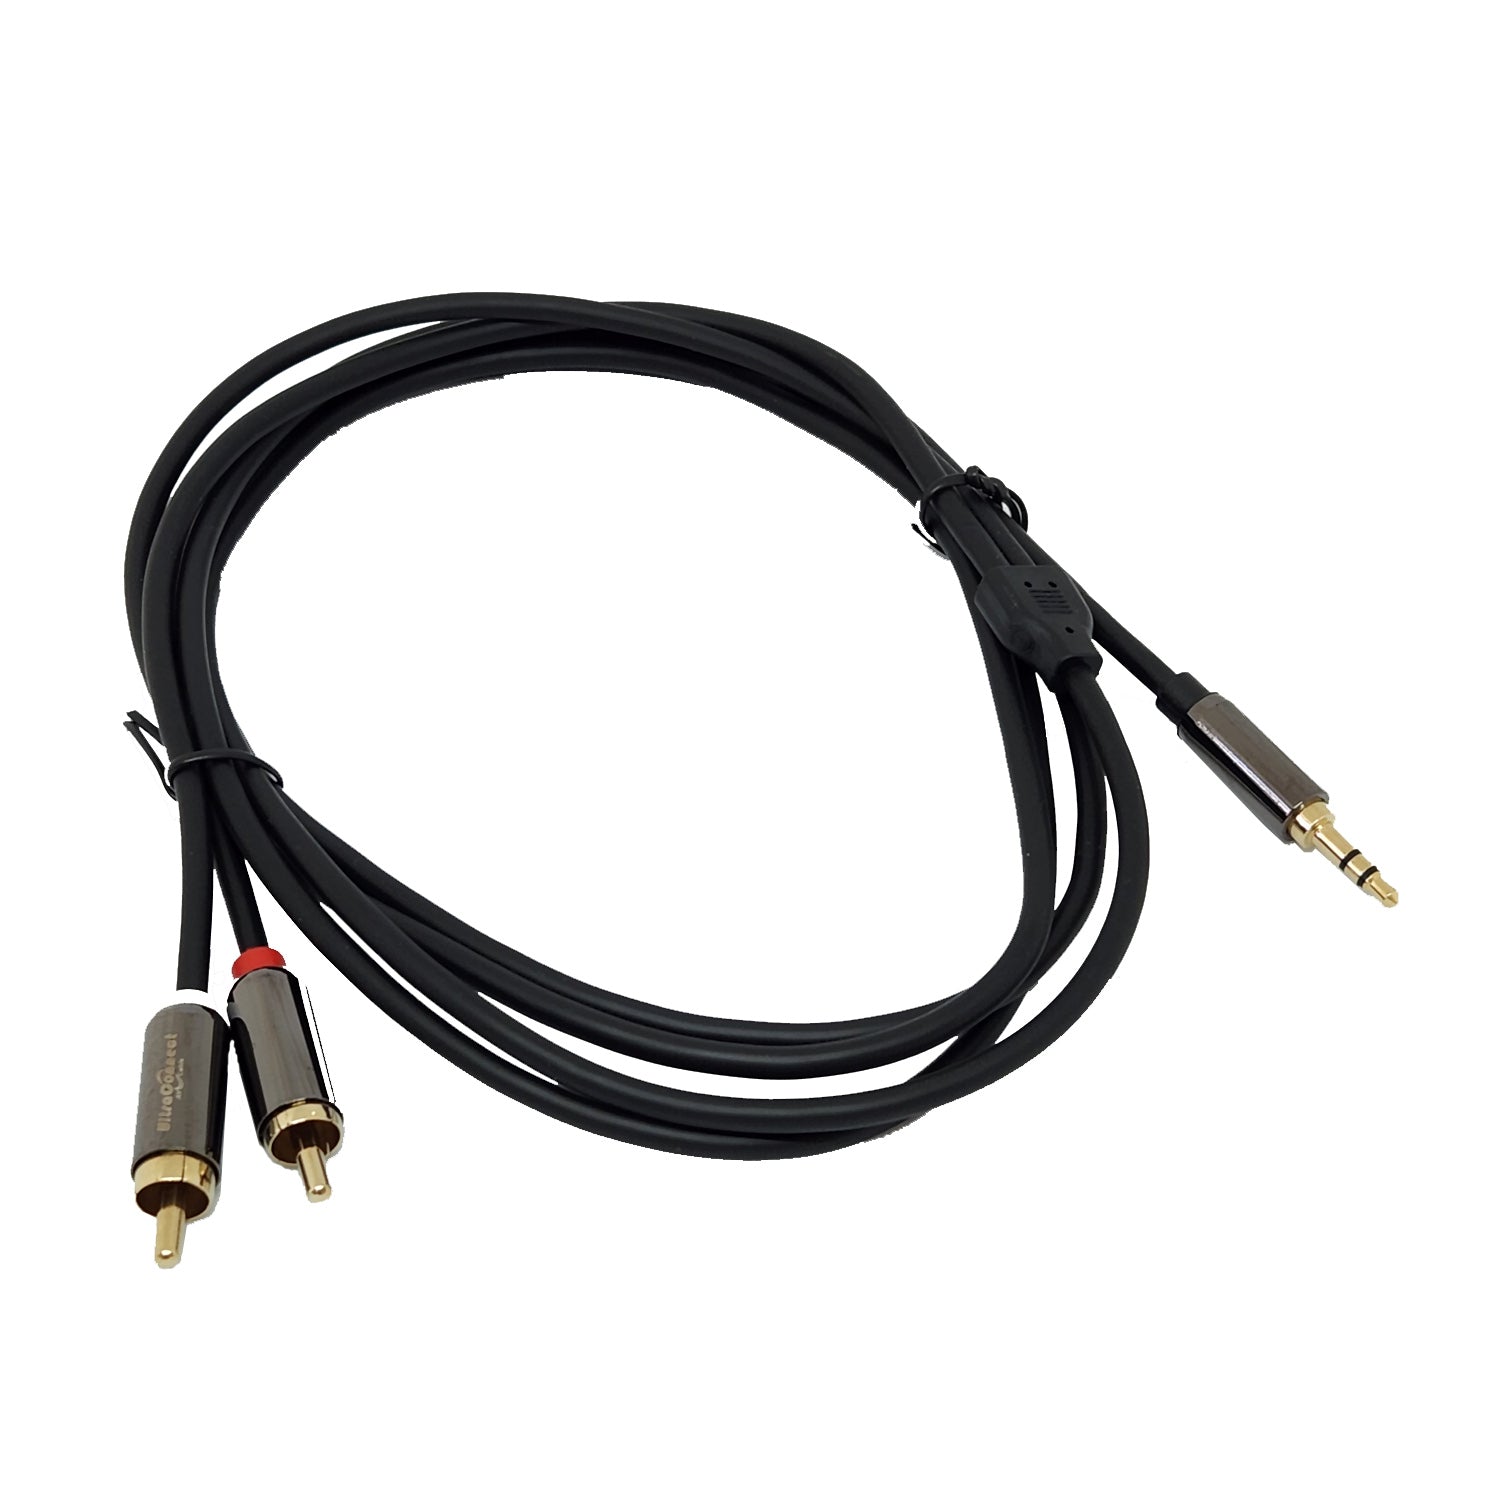 2m 3.5mm Male to RCA Male (Stereo) Audio Cable (Laptop to Amplifier) - Karaoke Home Entertainment